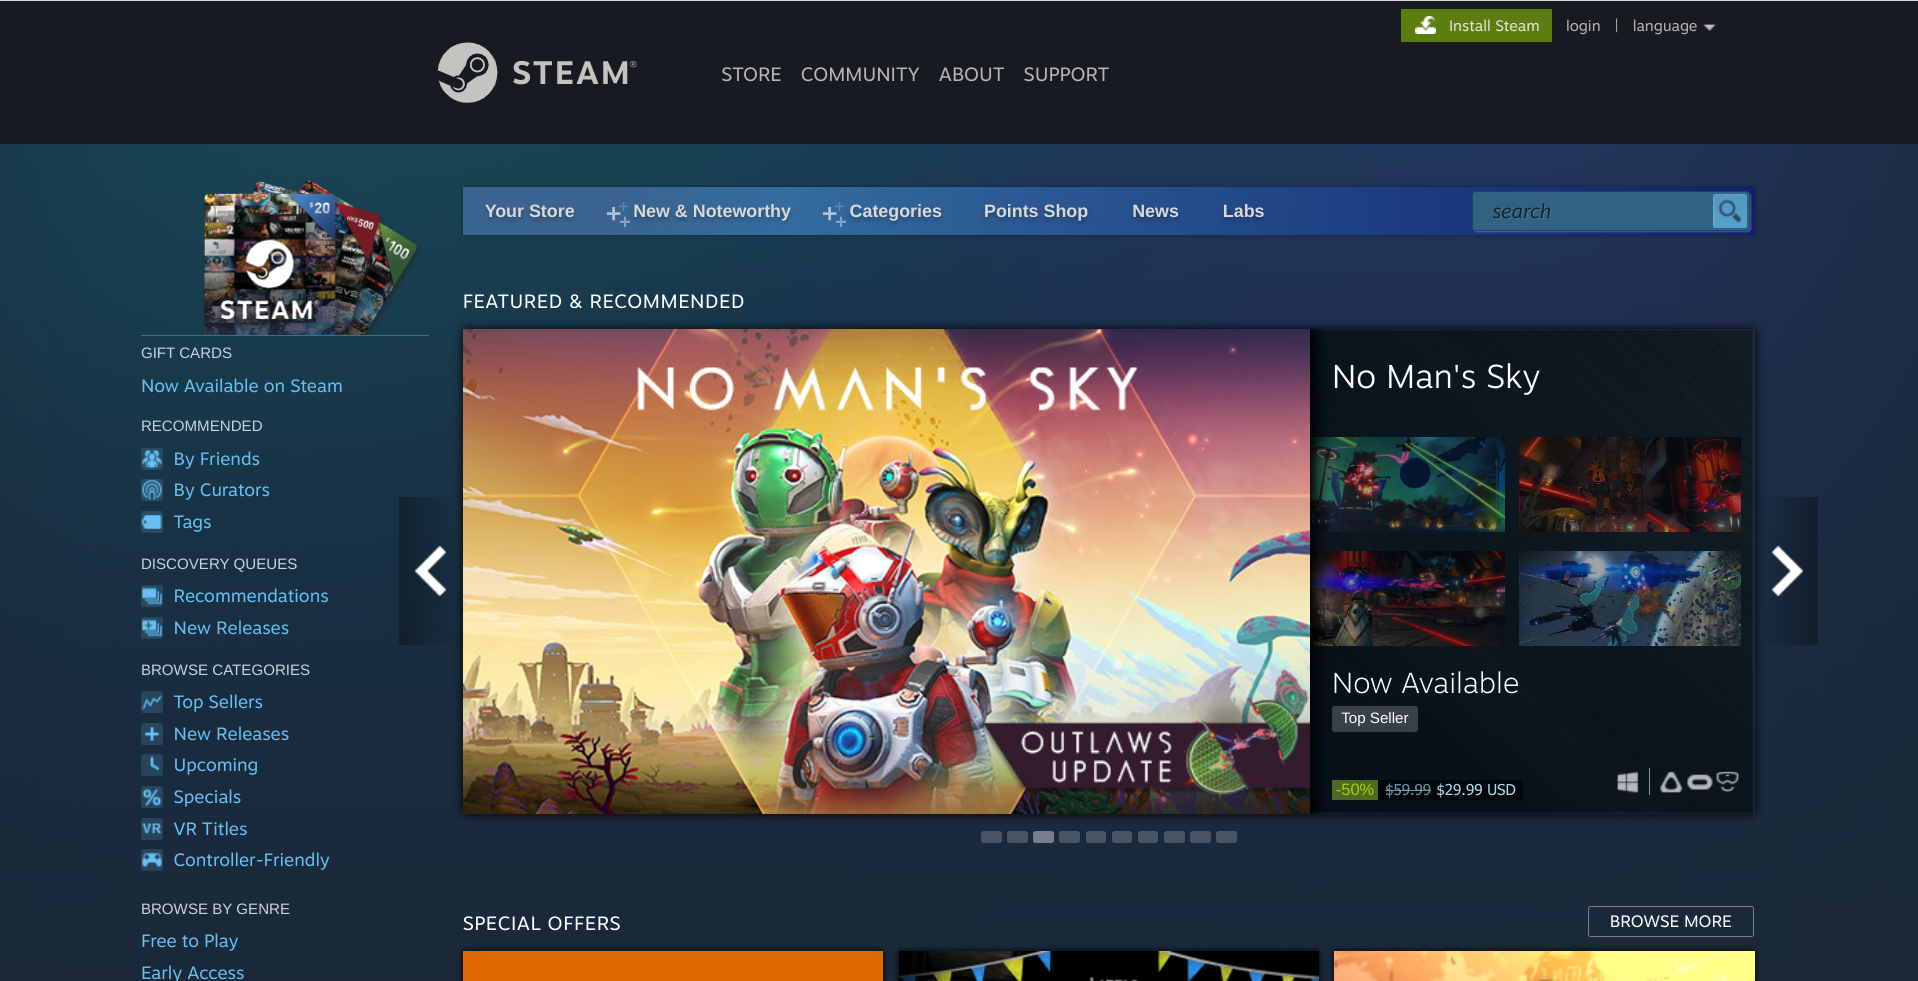 Steam is the world's largest online video game storefront. 